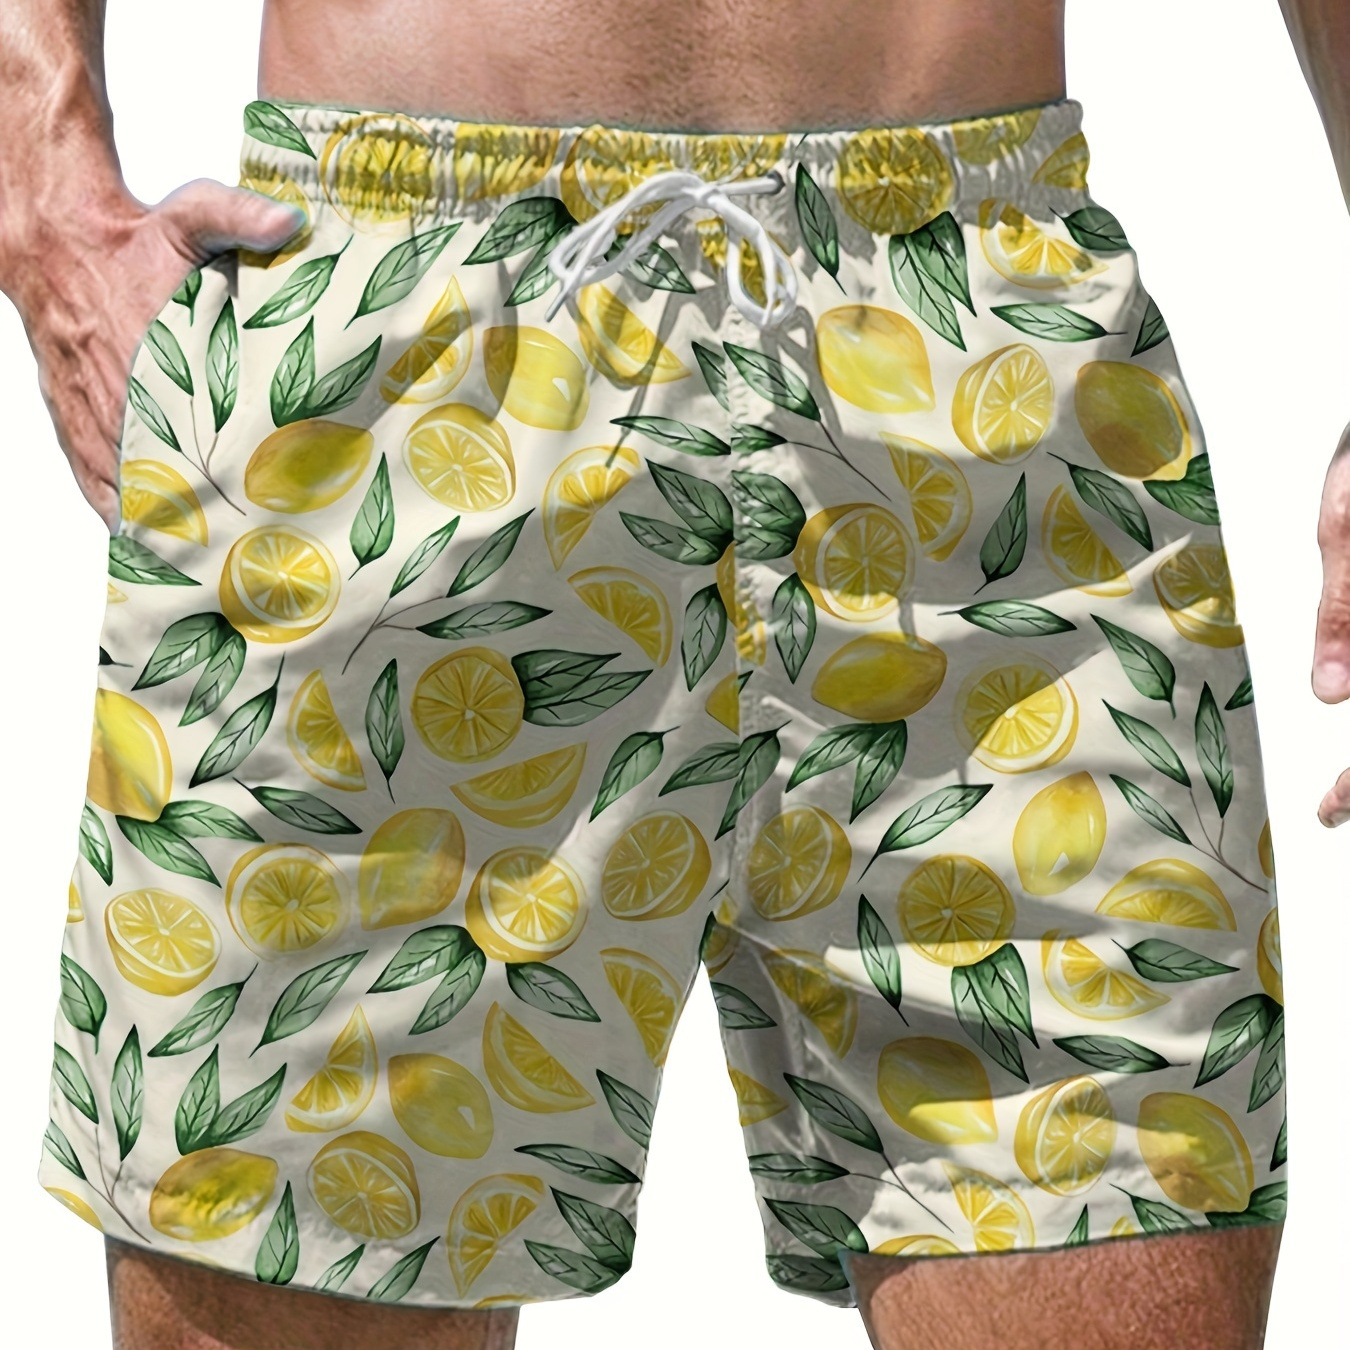 

Men's Lemon And Floral Pattern Shorts With Drawstring And Pockets, Casual And Chic Shorts For Summer Leisurewear And Vacation